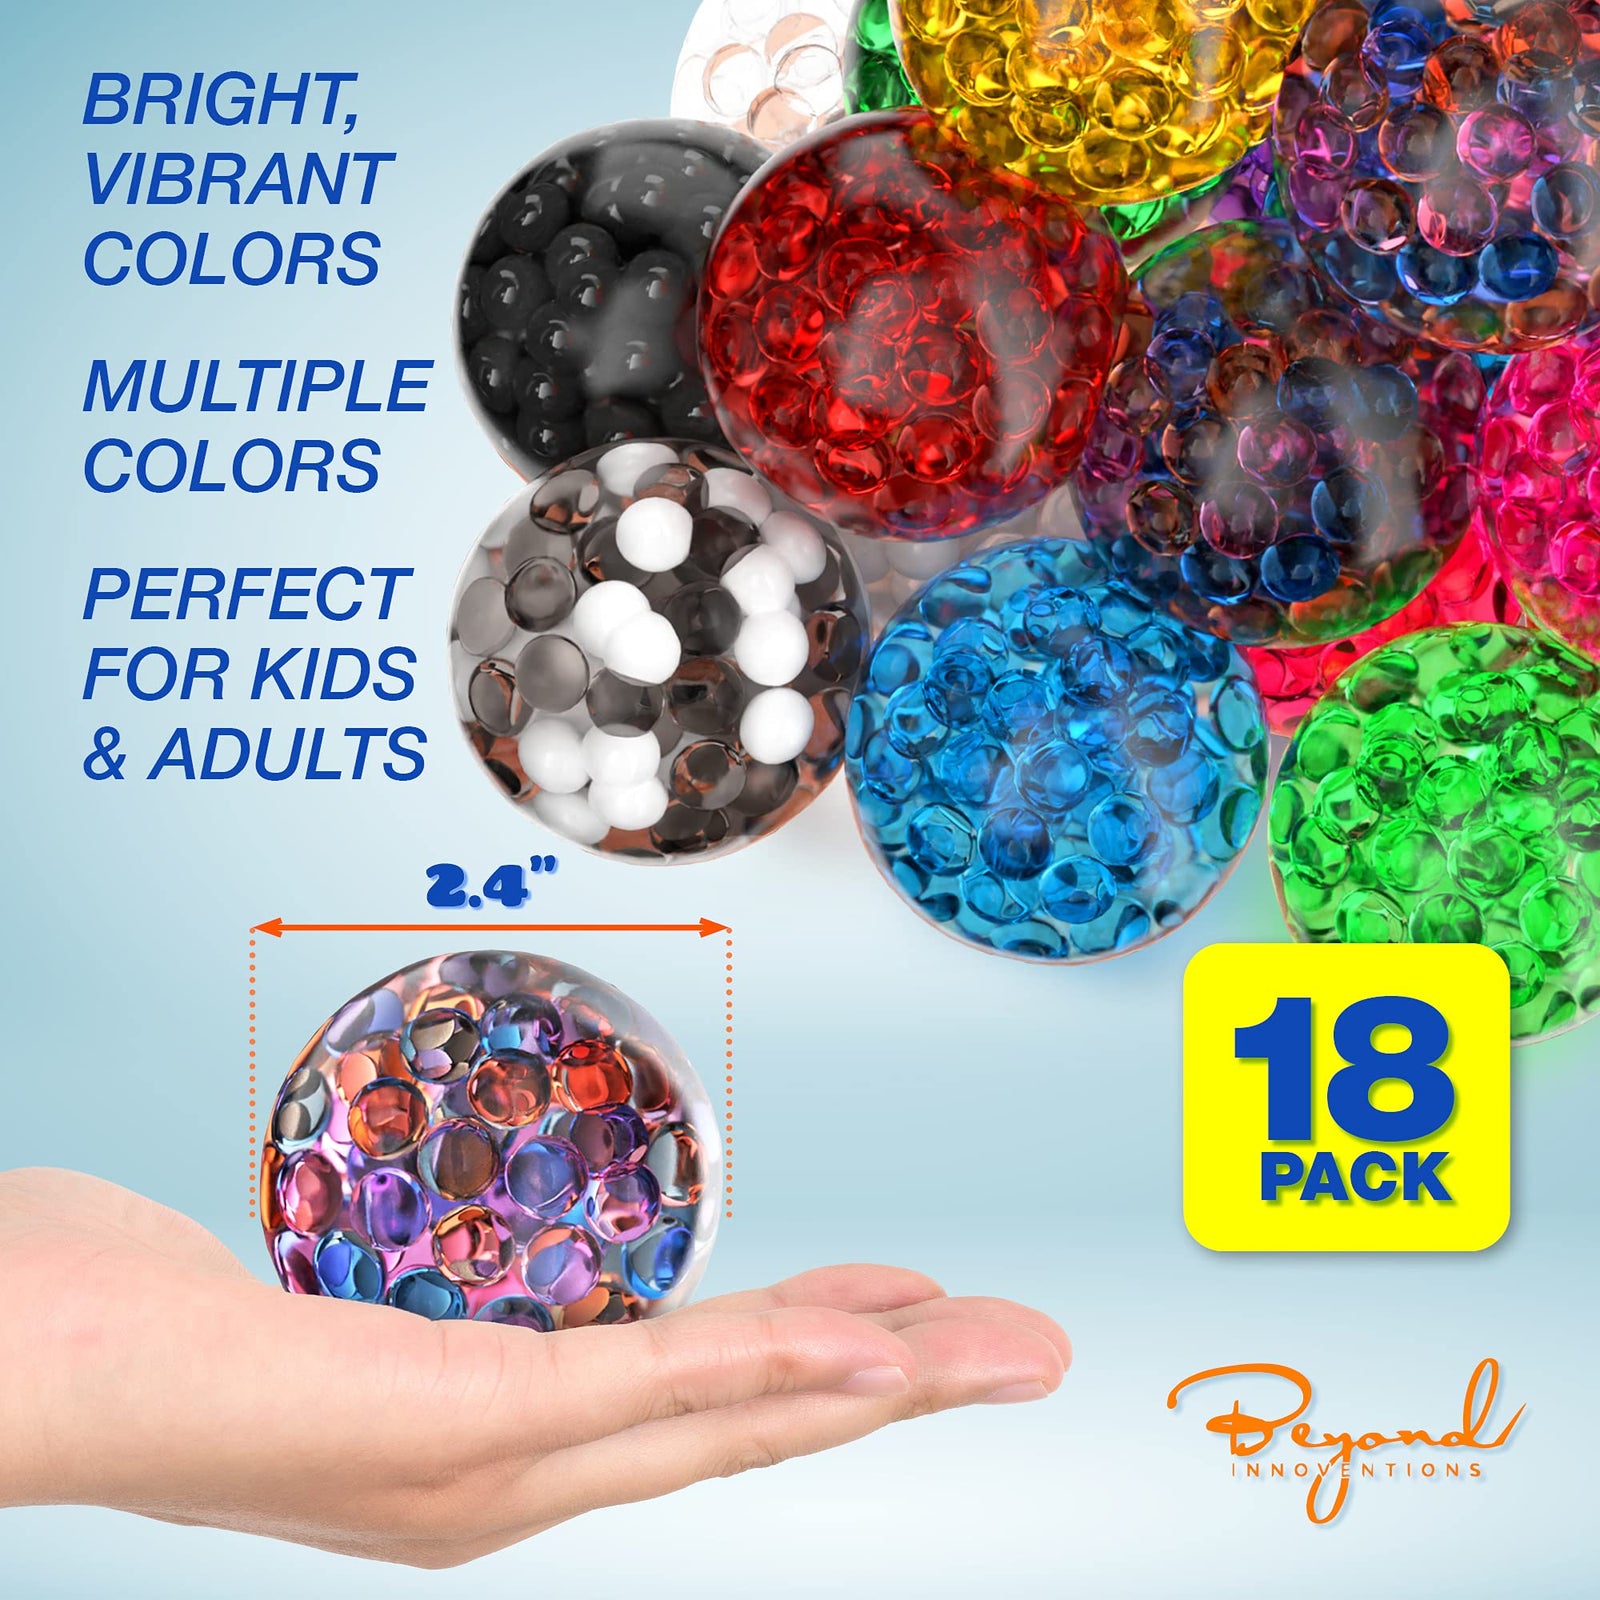 Stress Ball Set - 18 Pack - Stress Balls Fidget Toys for Kids and Adults - Sensory Ball, Squishy Balls with Colorful Water Beads,Anxiety Relief Calming Tool - Fidget Stress Toys for Autism & ADD/ADHD